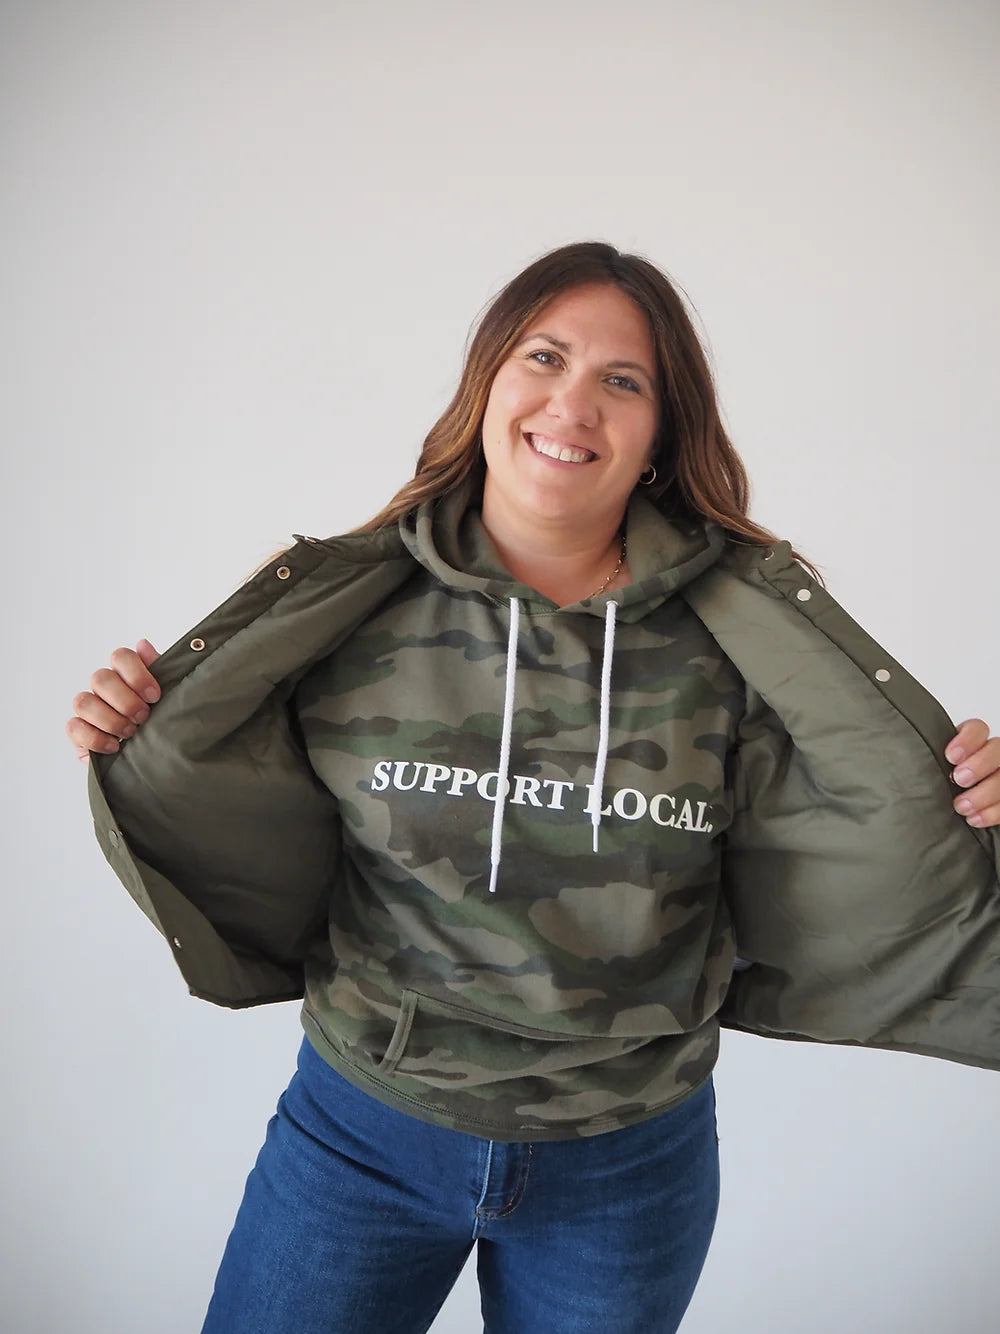 The Support Local Hoodie